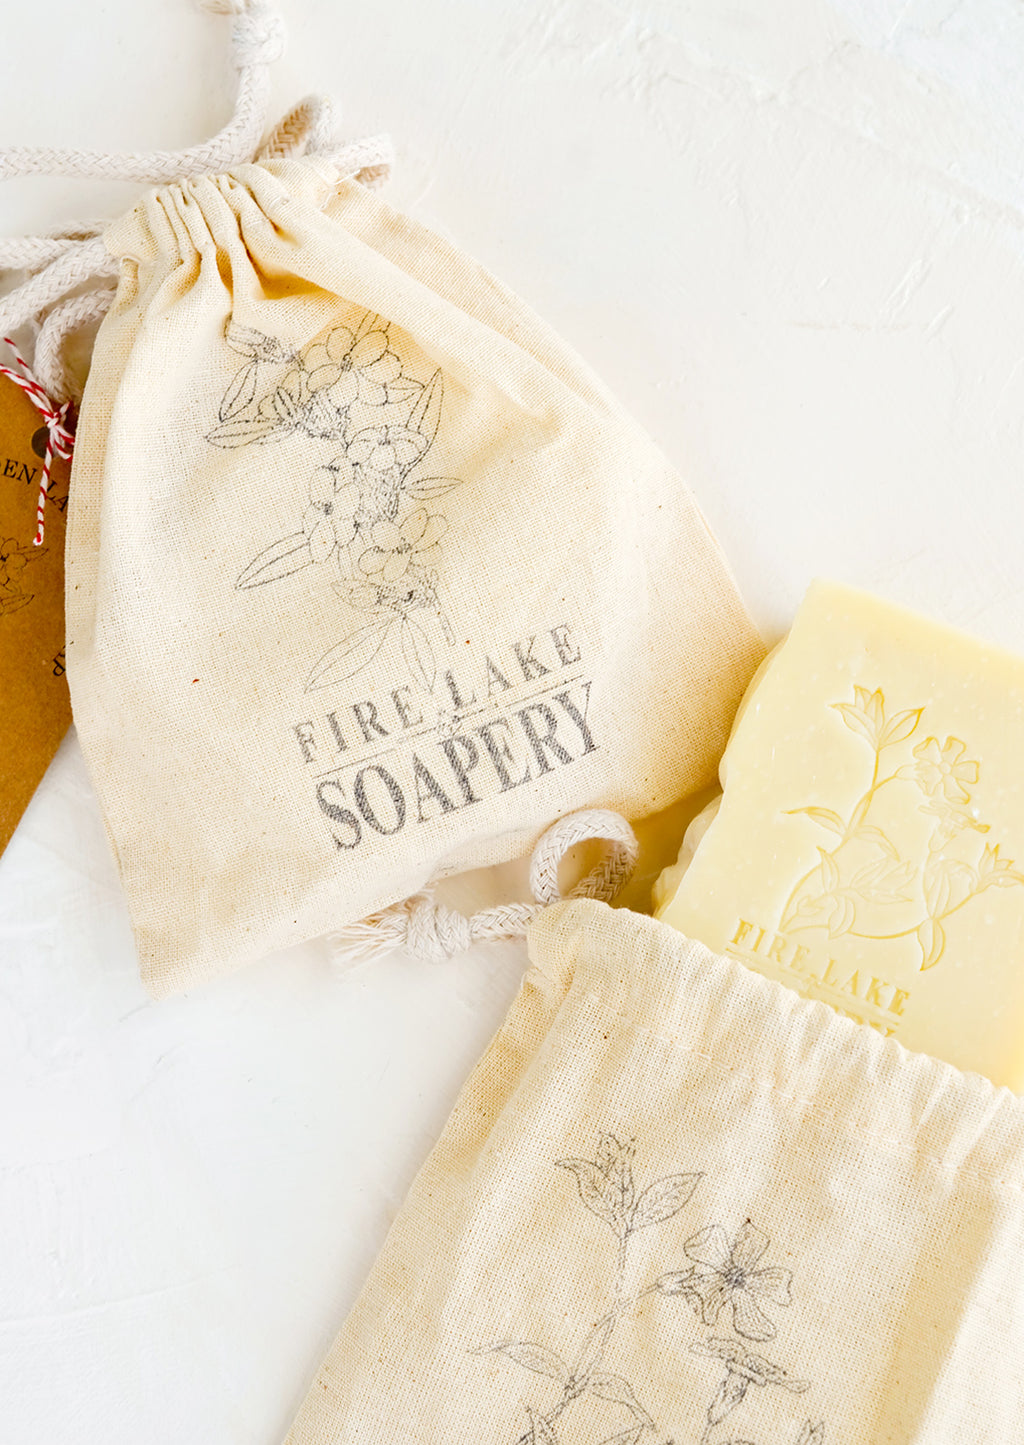 2: Floral stamped muslin bags containing bar soap.